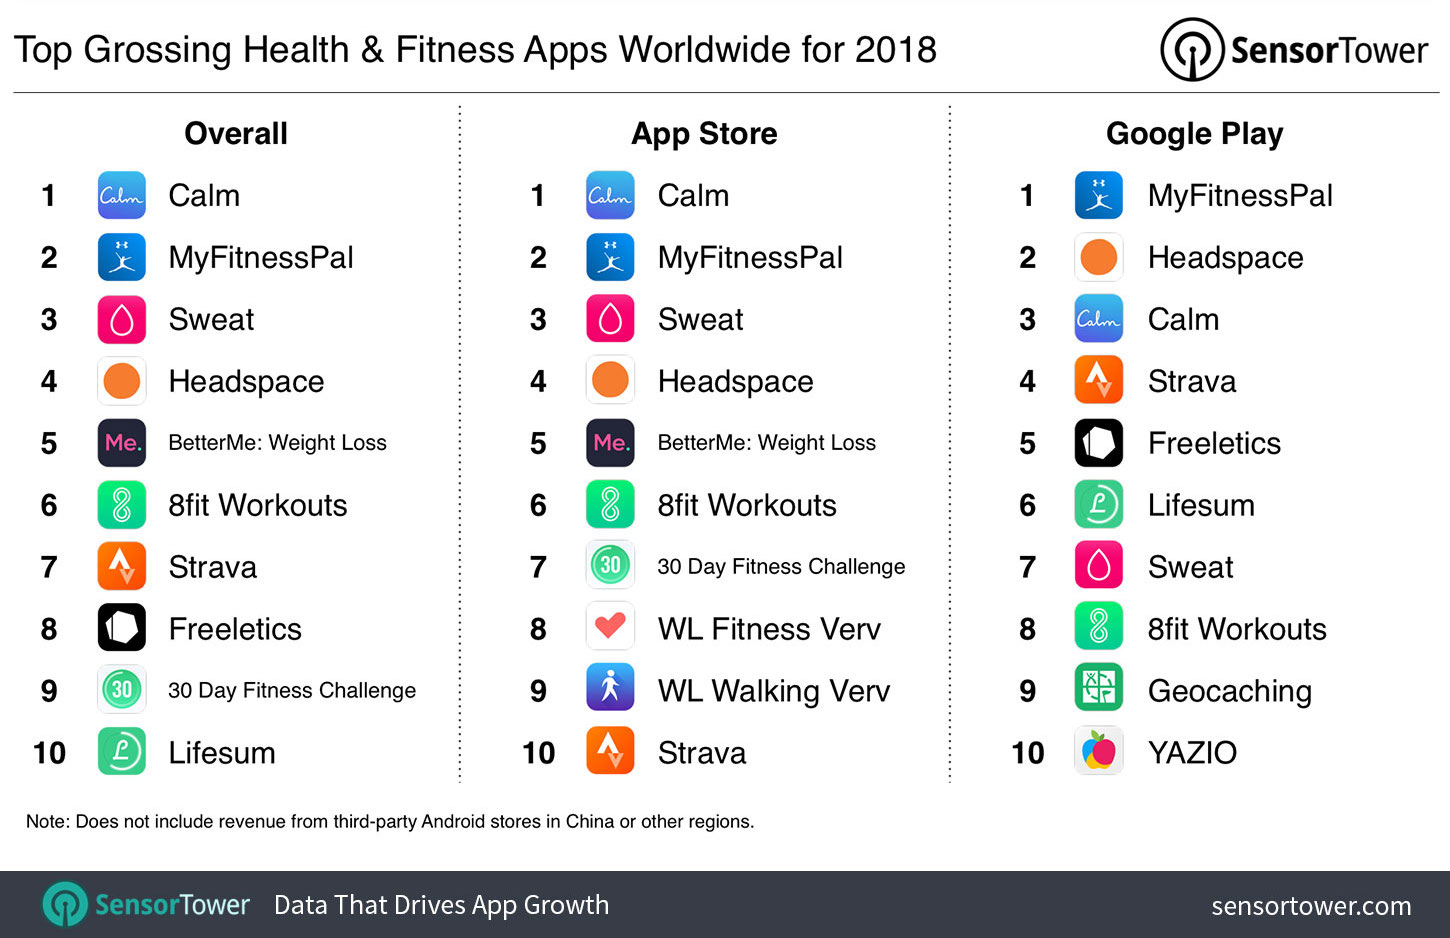 Top Grossing Health and Fitness Apps Worldwide for 2018